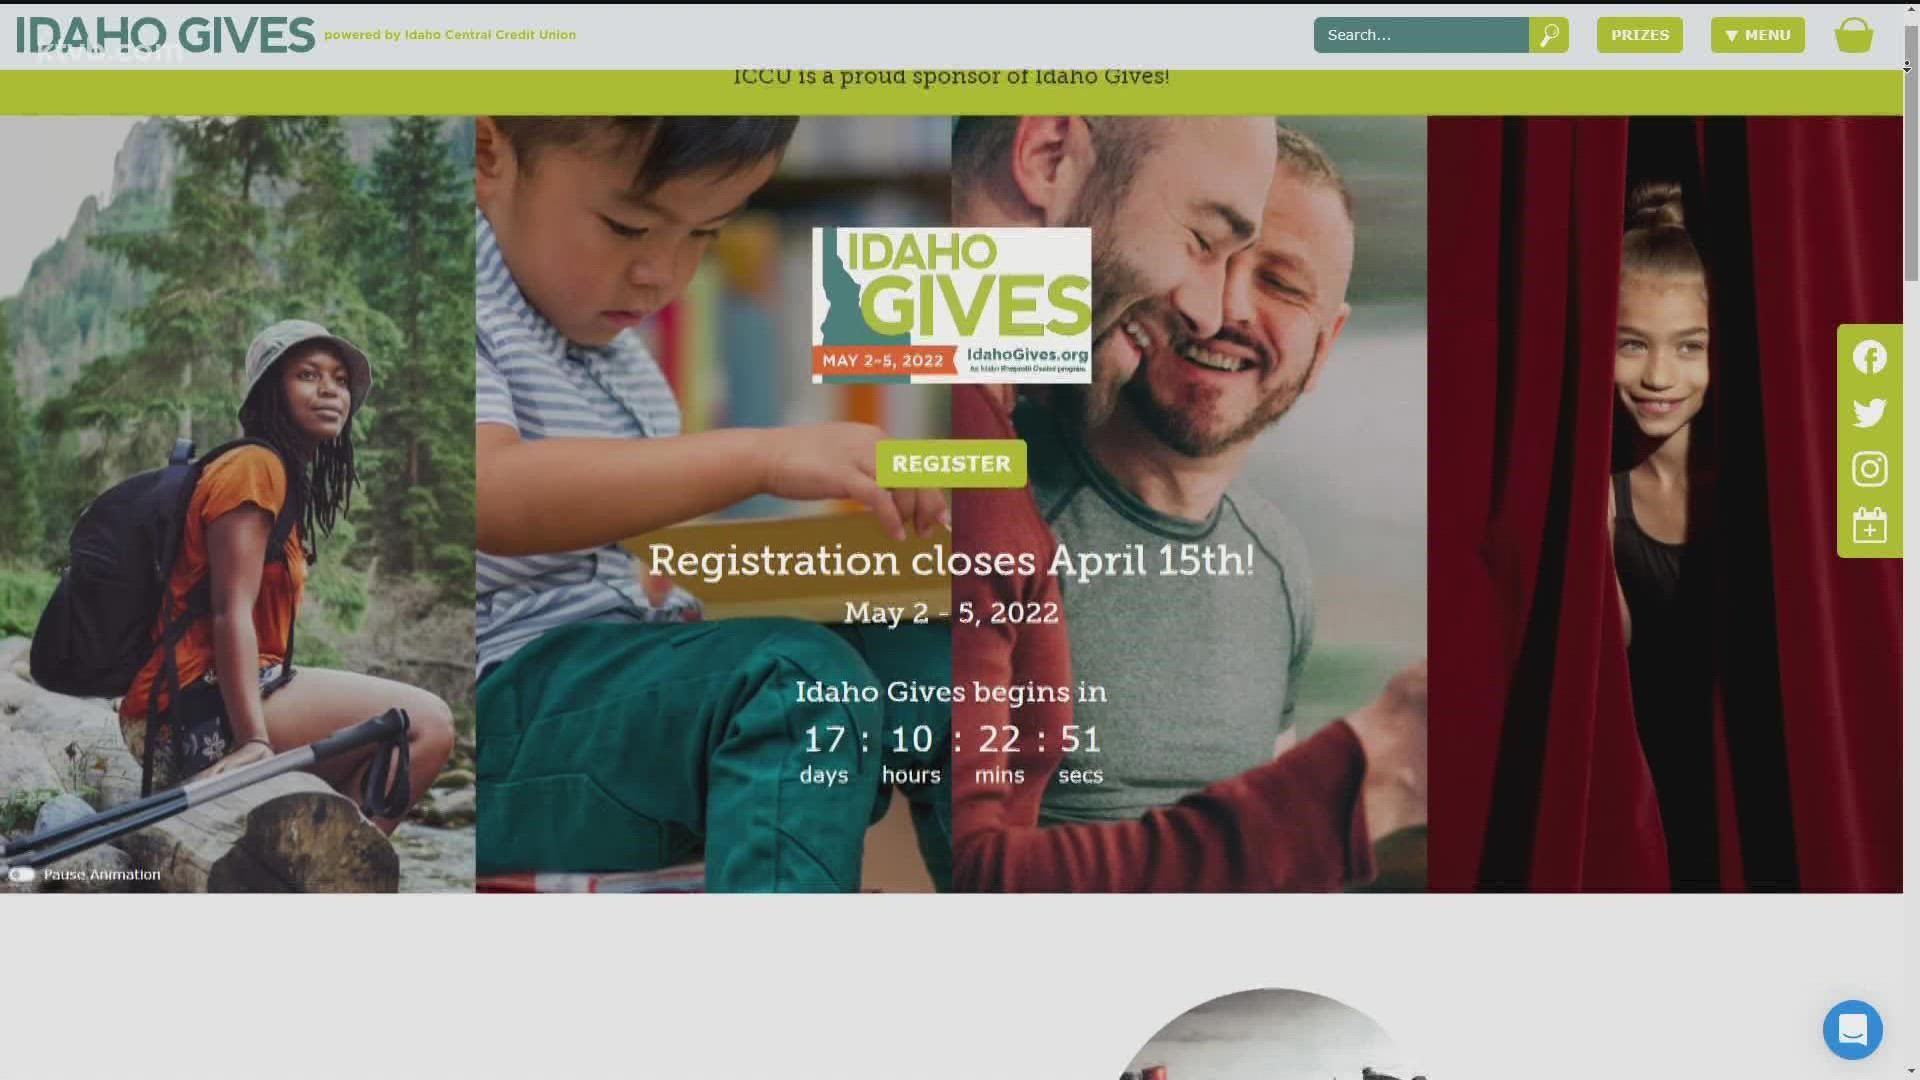 Idaho's biggest day of online giving begins next month. Attention non-profits, time is running out to register for the event.